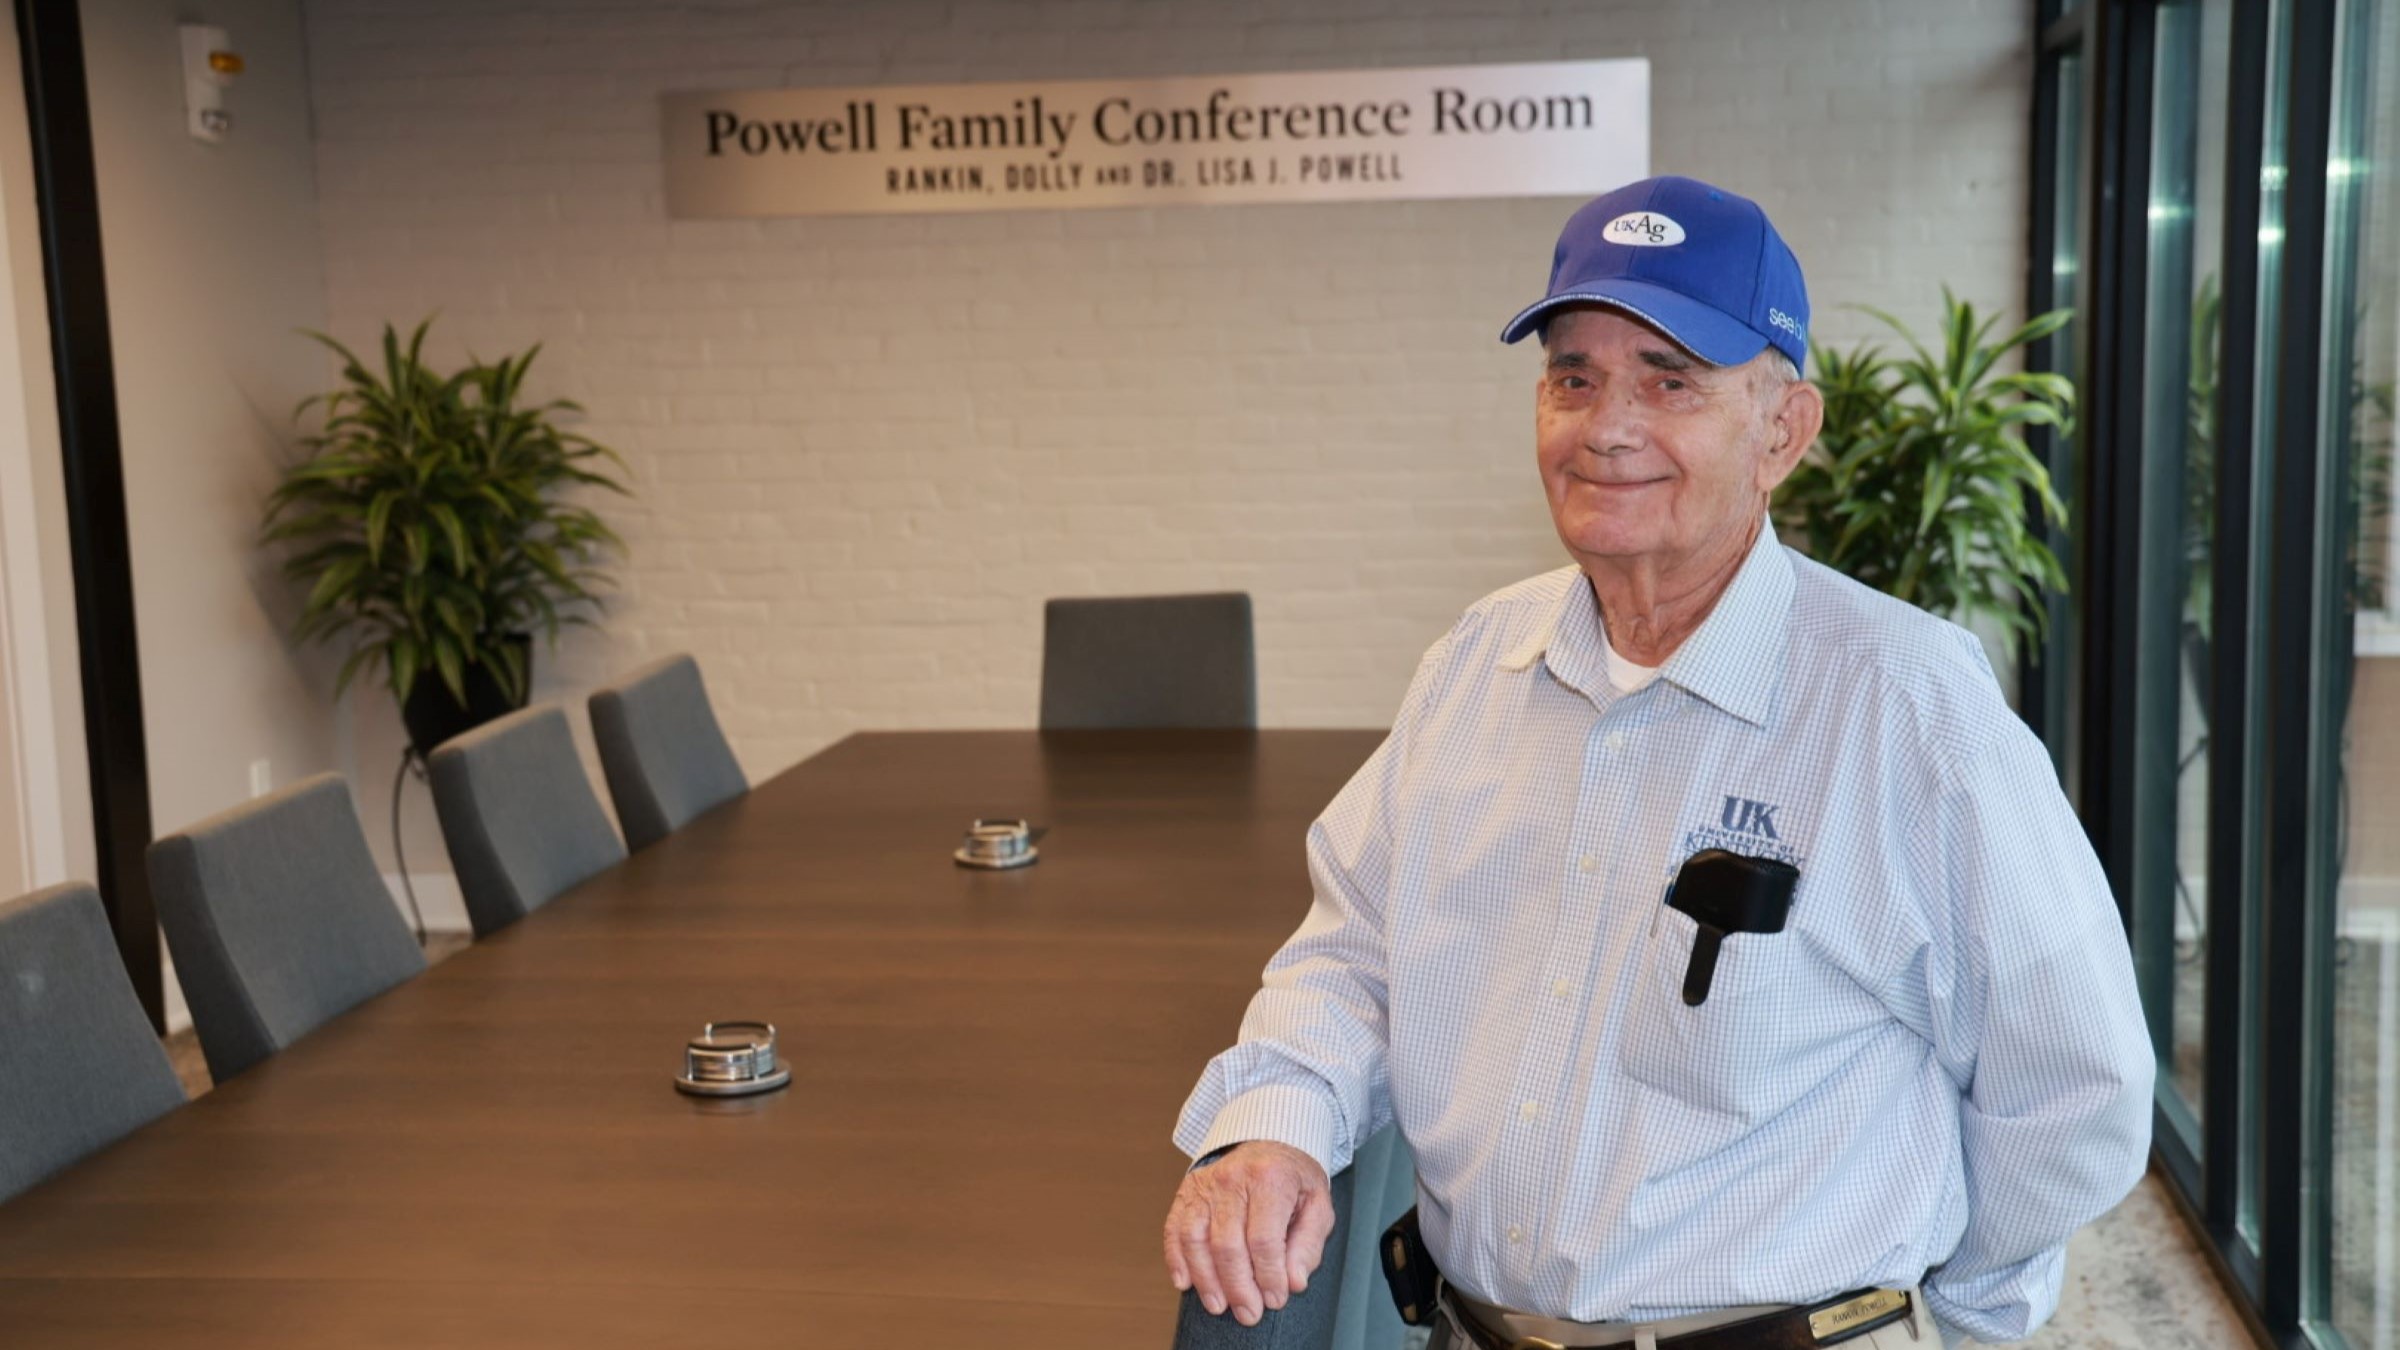 Rankin Powell in the Powell Family Conference Room at the Cooper House on UK's campus.